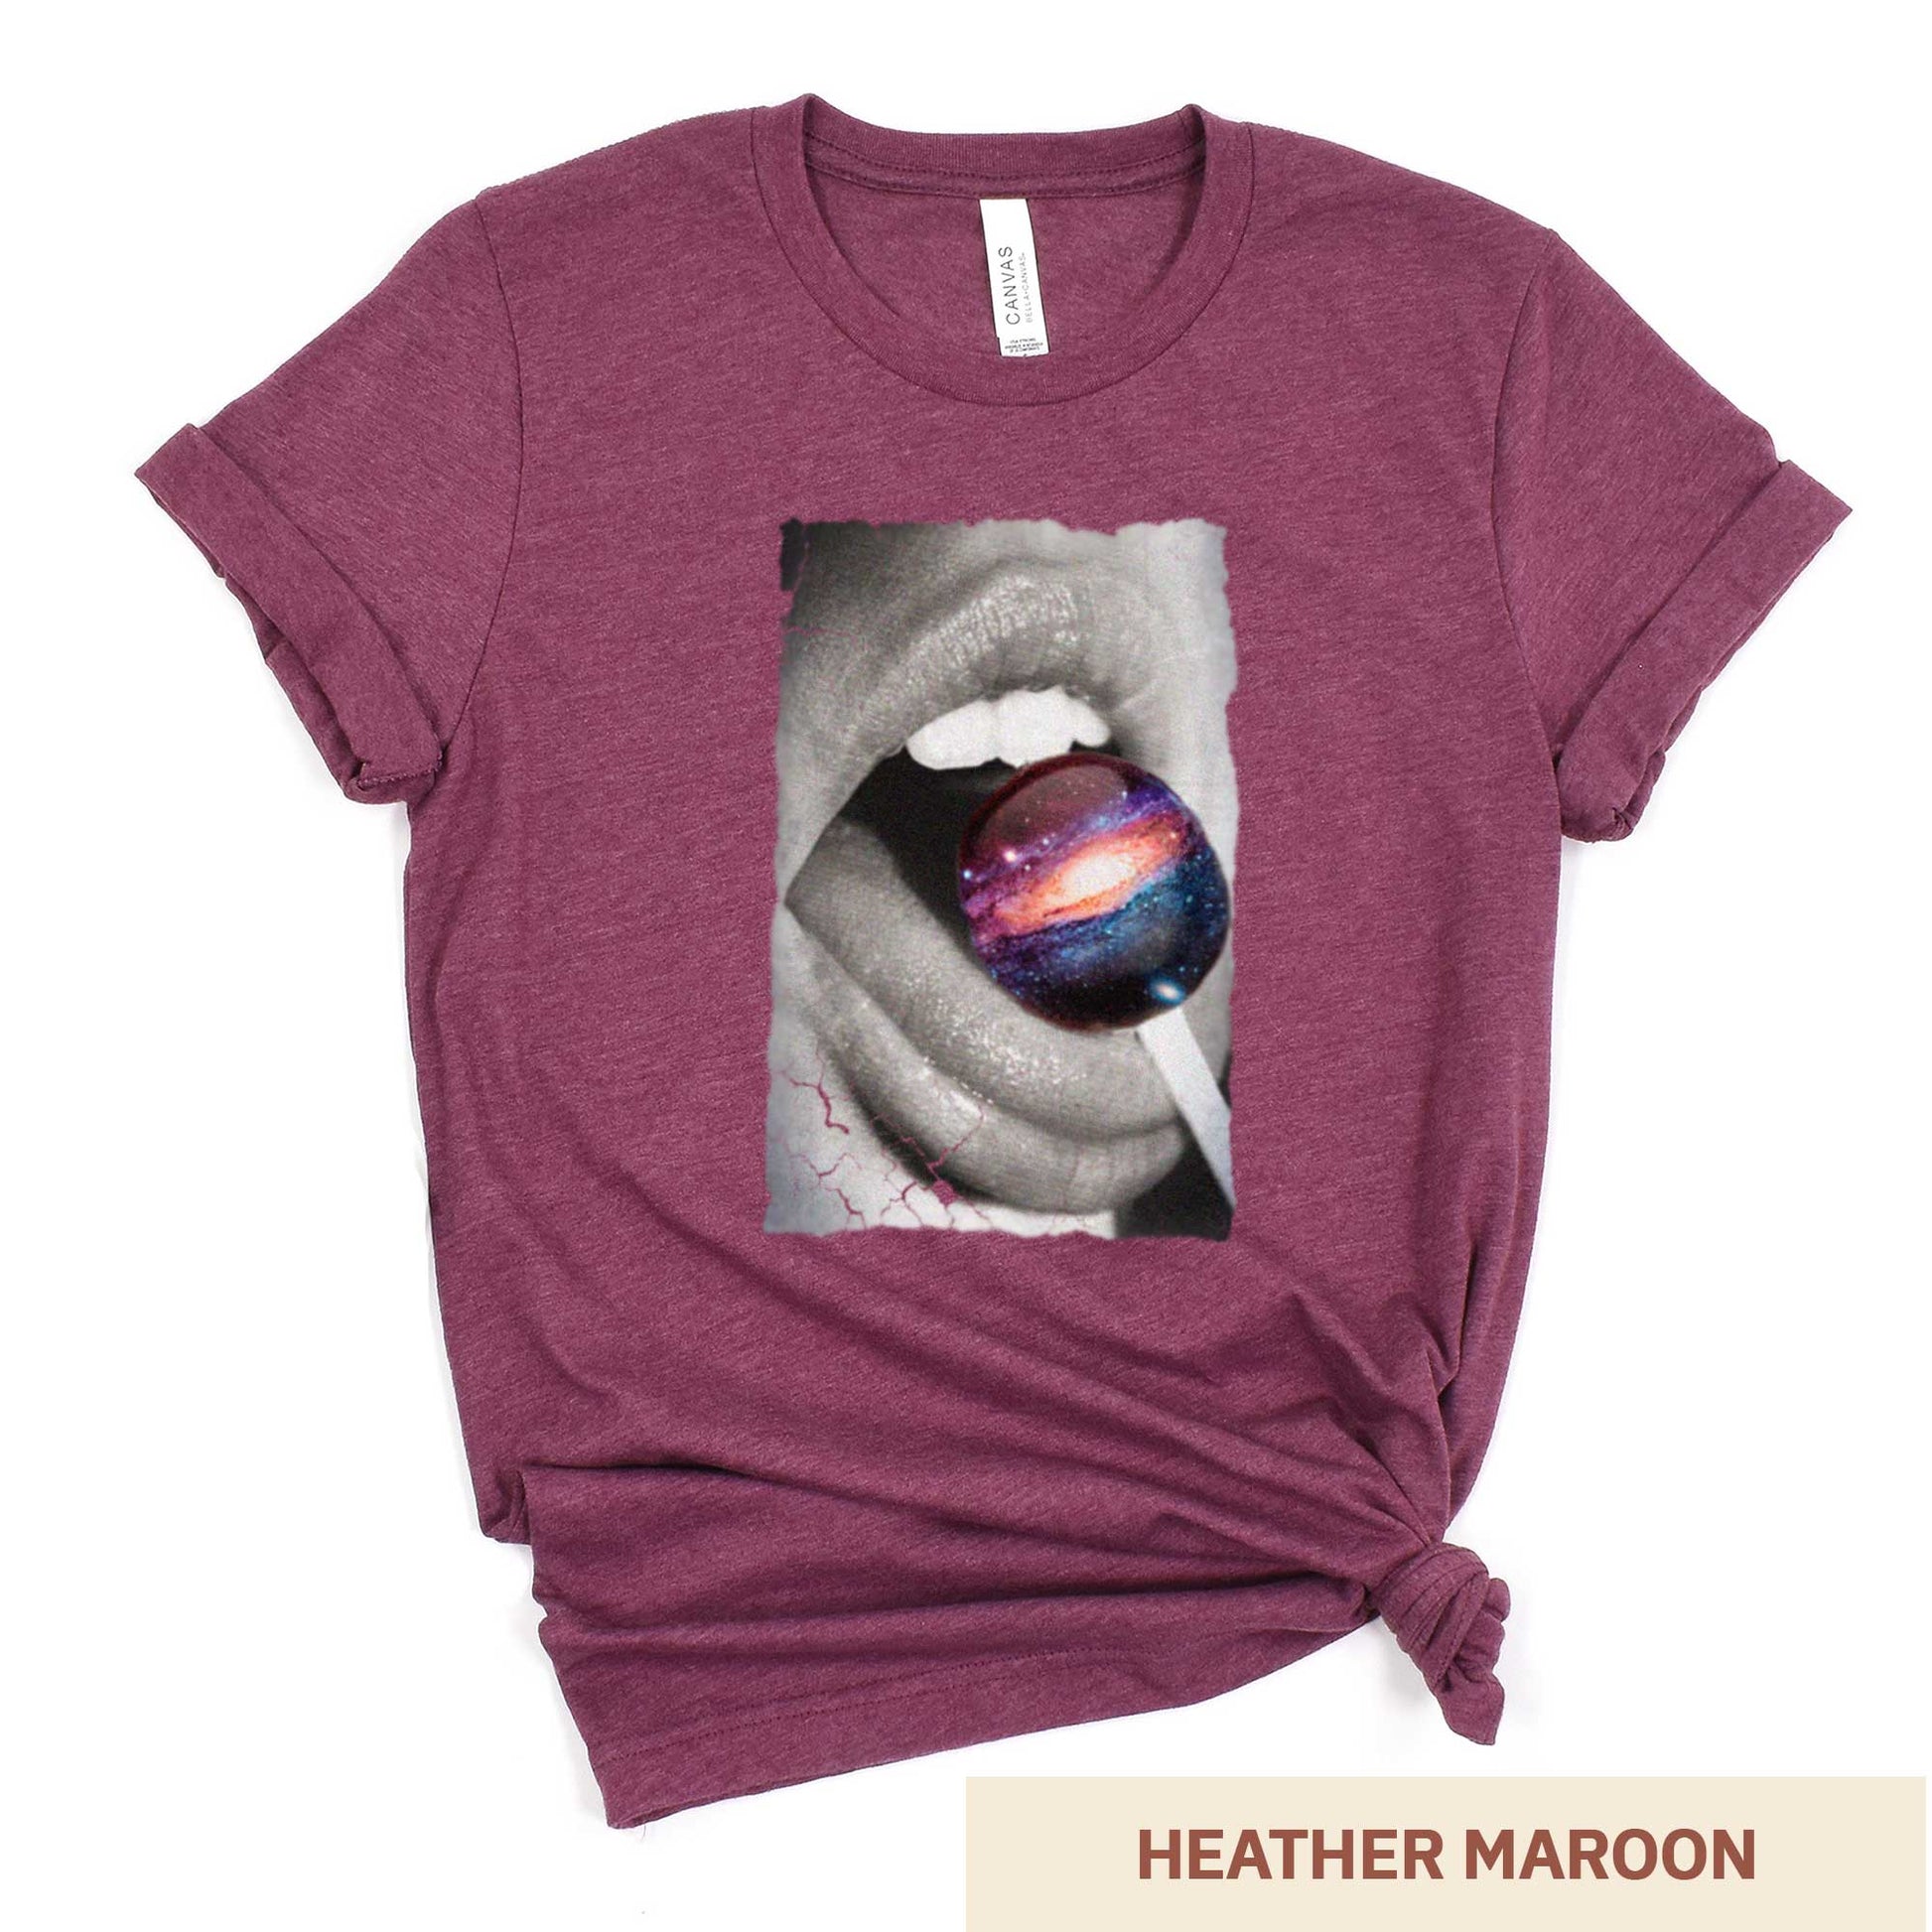 A heather maroon Bella Canvas t-shirt with a black and white image of a woman's mouth eating a lollipop that looks like a swirling galaxy.